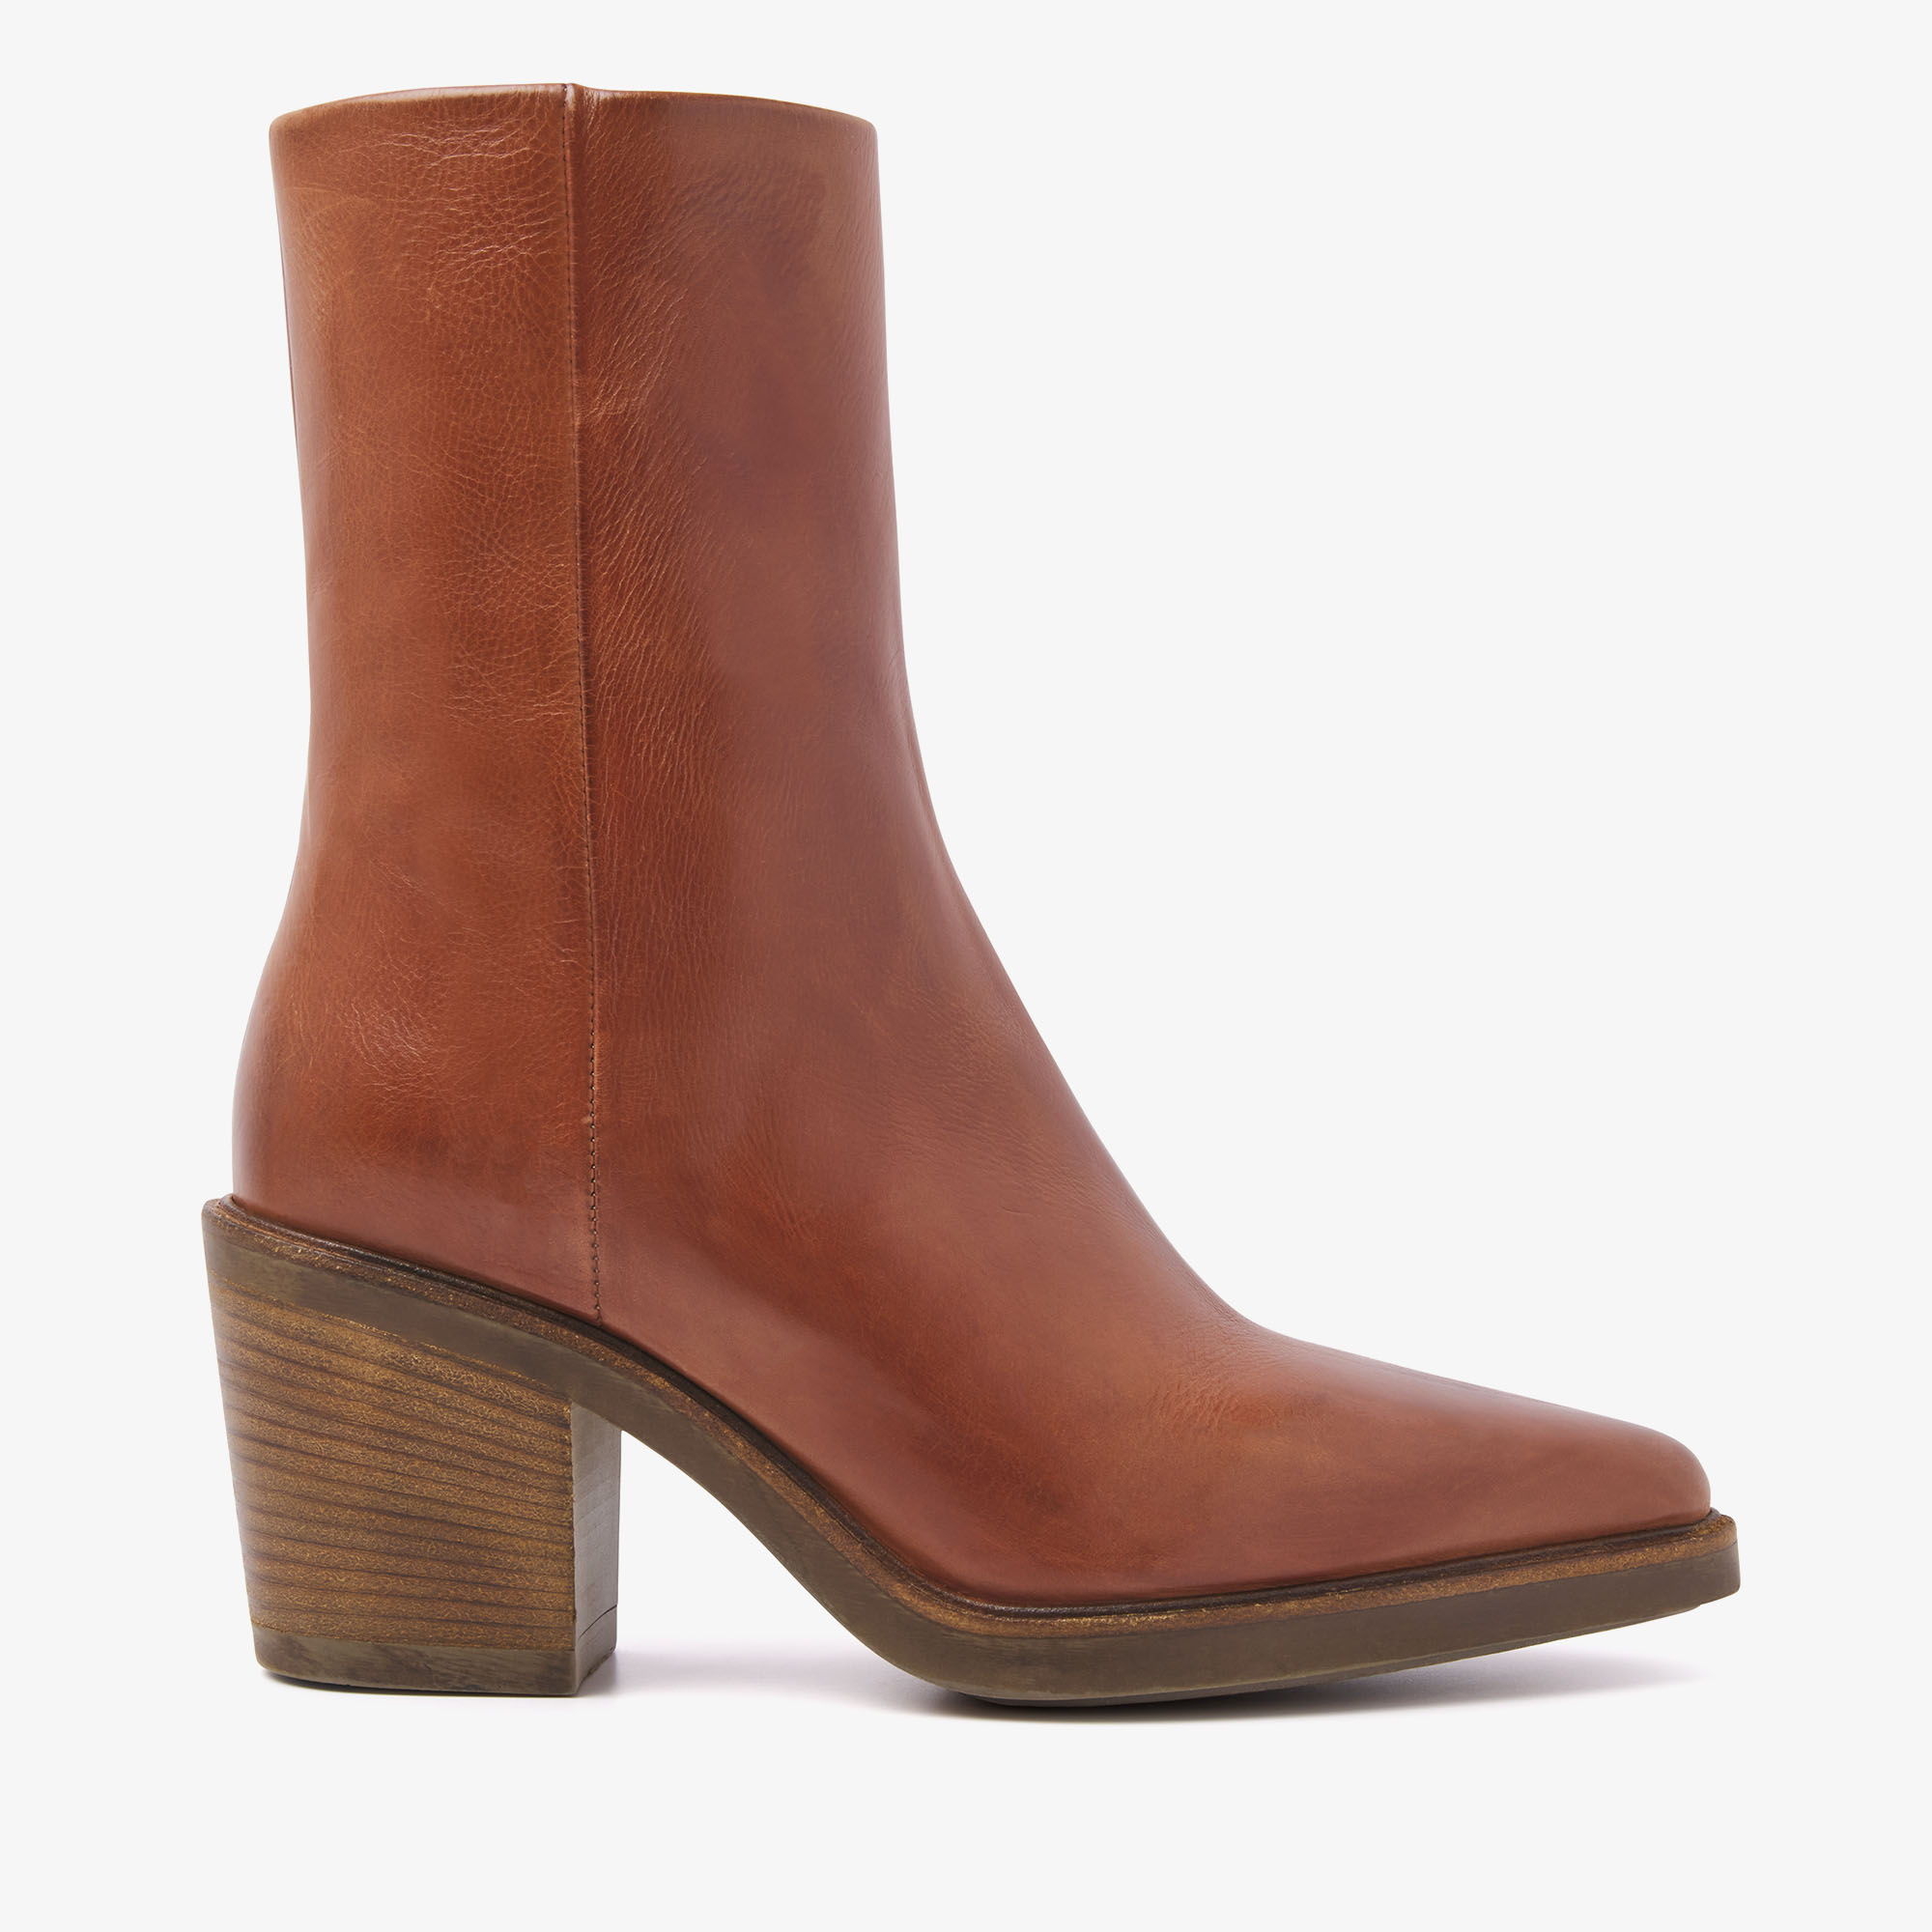 VIA VAI Kailee Faye cognac ankle boots